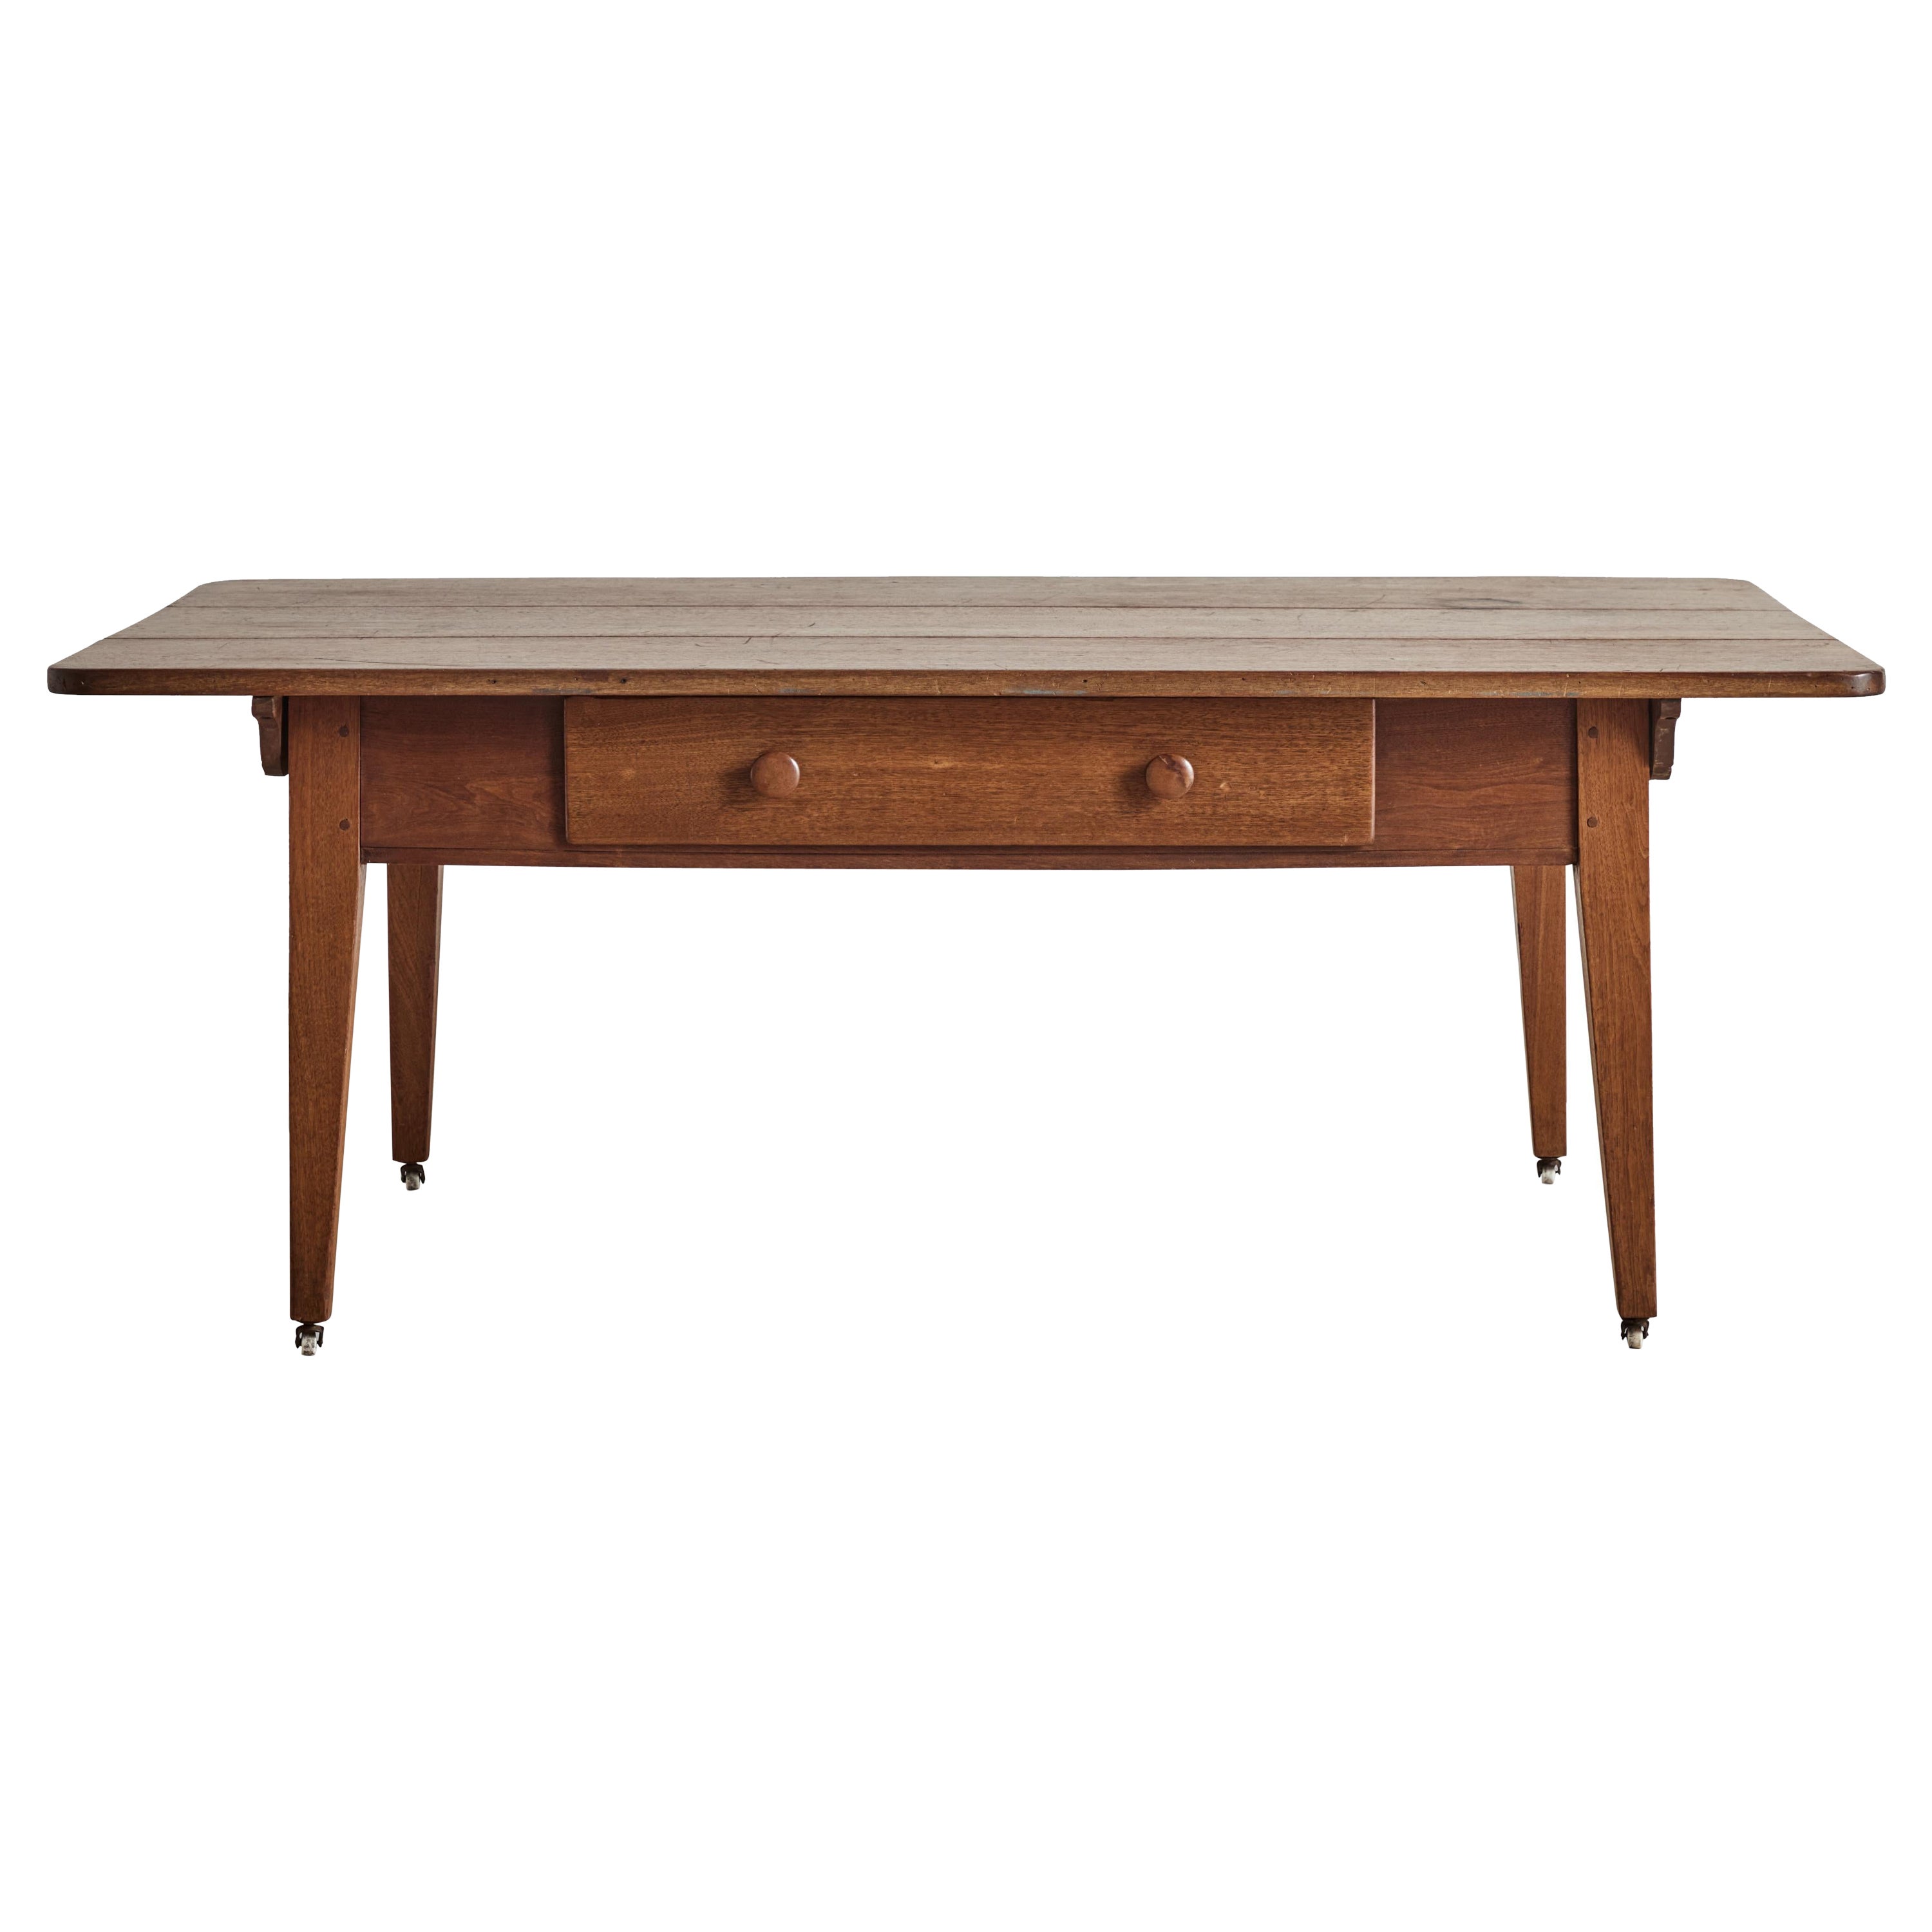 Early American Work Table For Sale